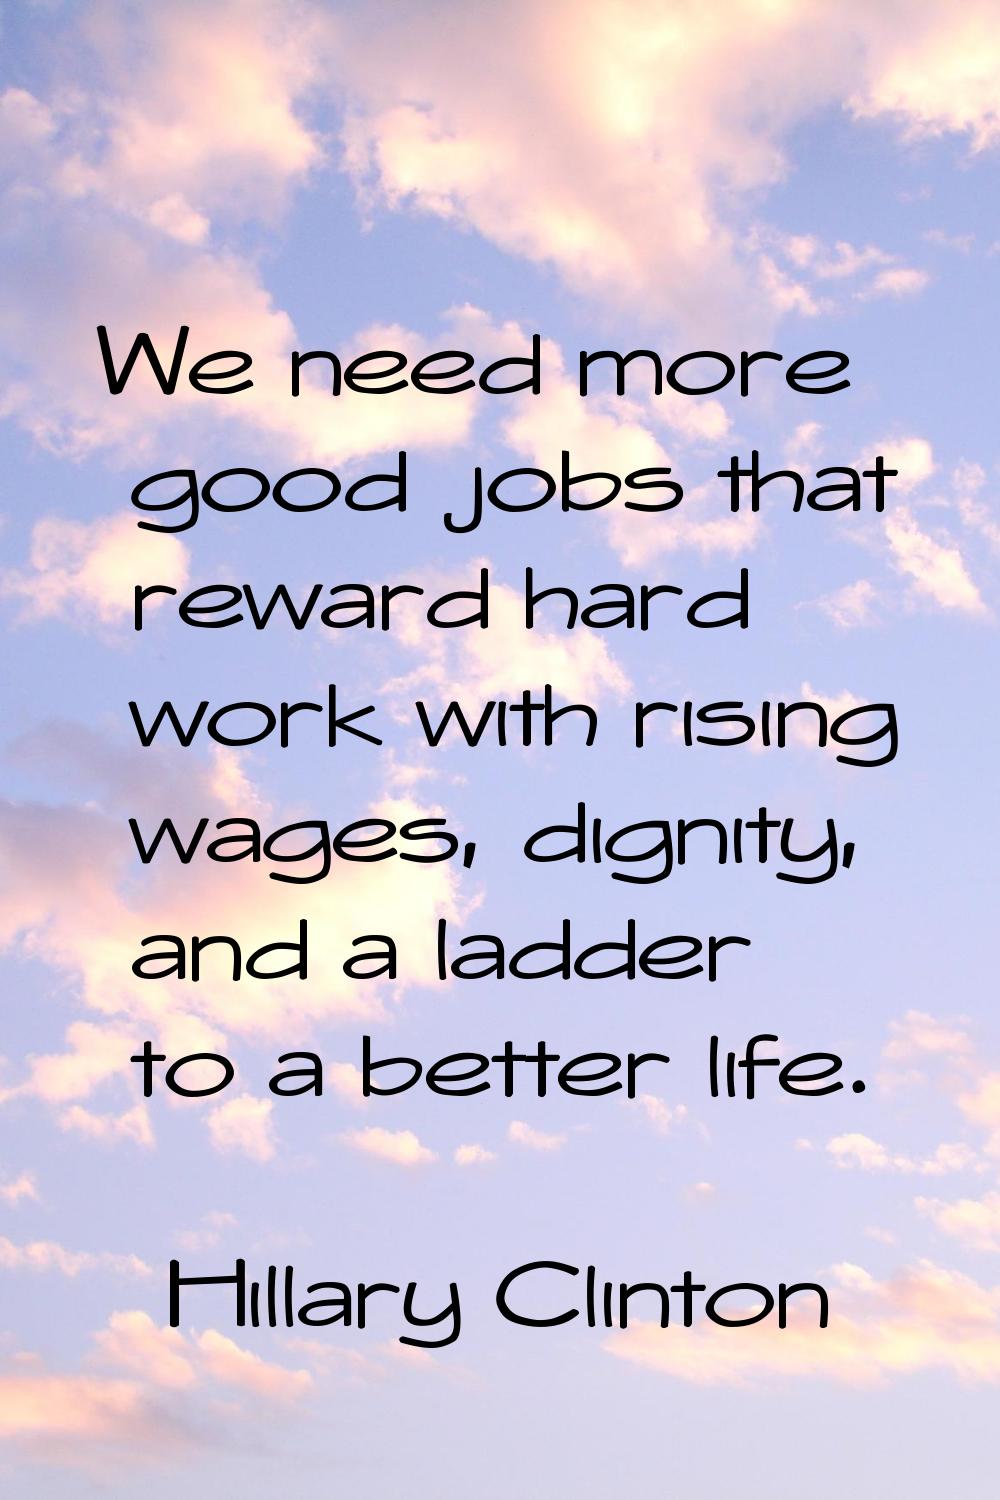 We need more good jobs that reward hard work with rising wages, dignity, and a ladder to a better l